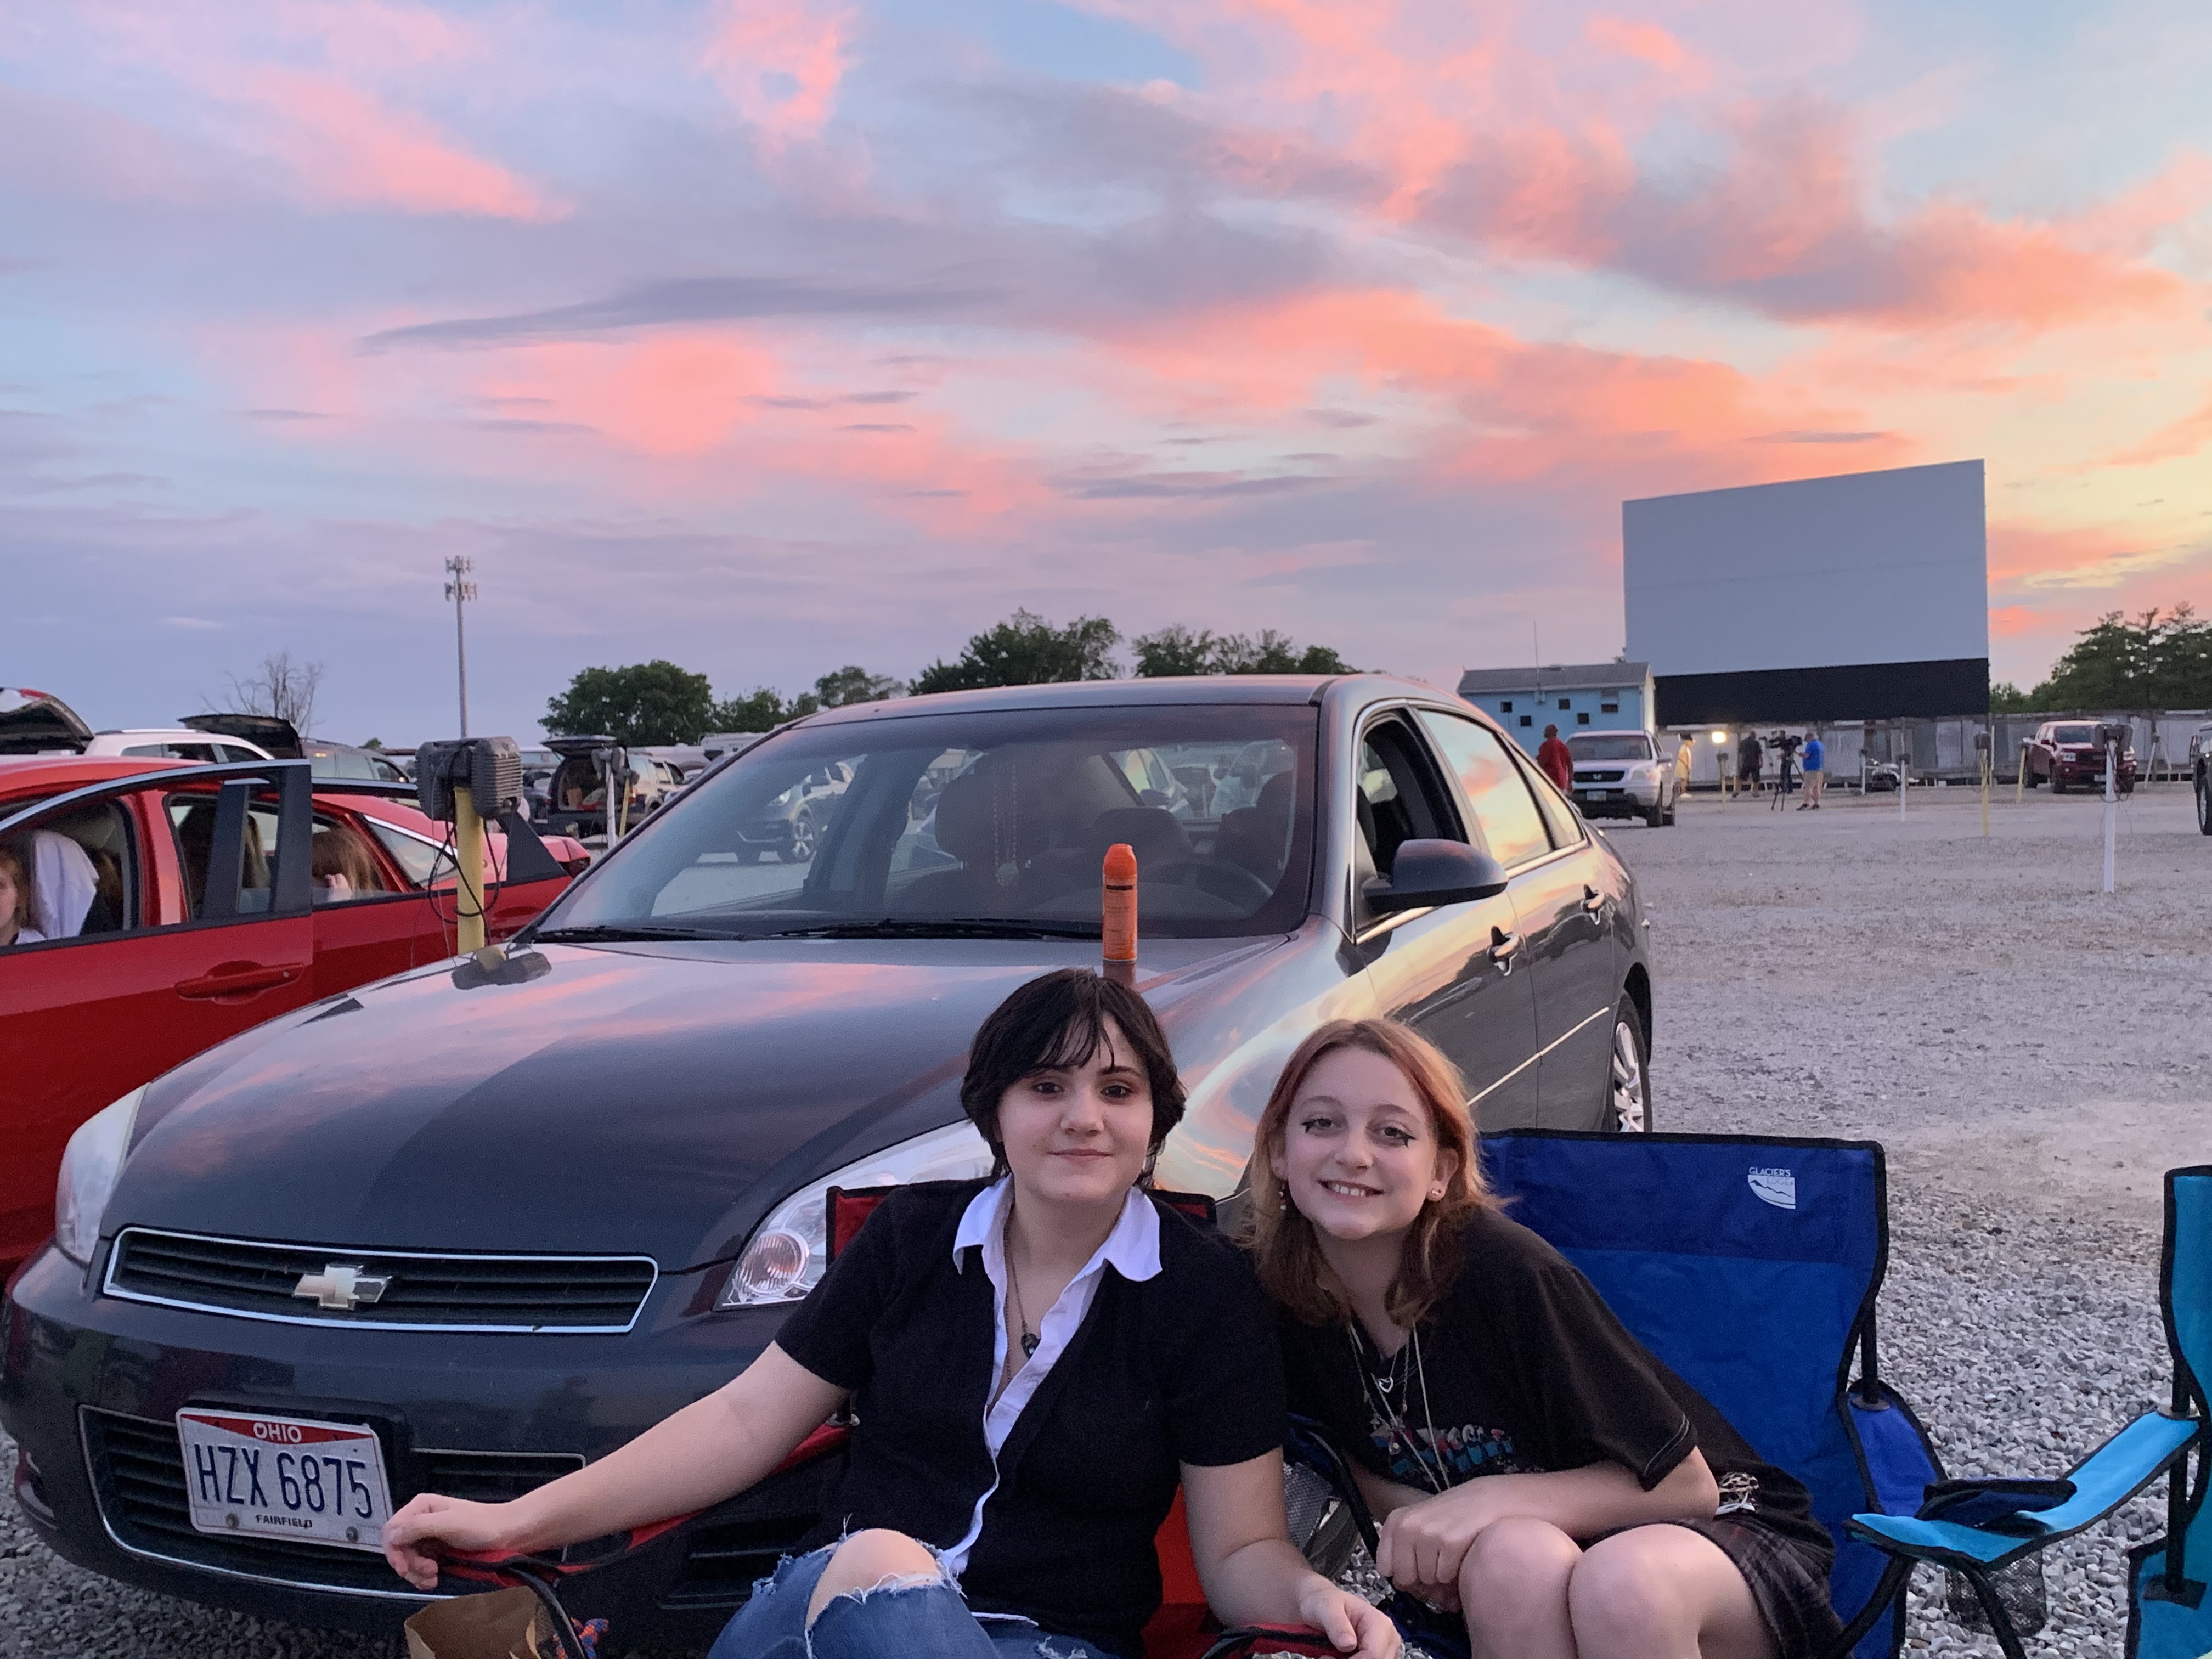 Two teenage girls sit together outside a car at the drive-in